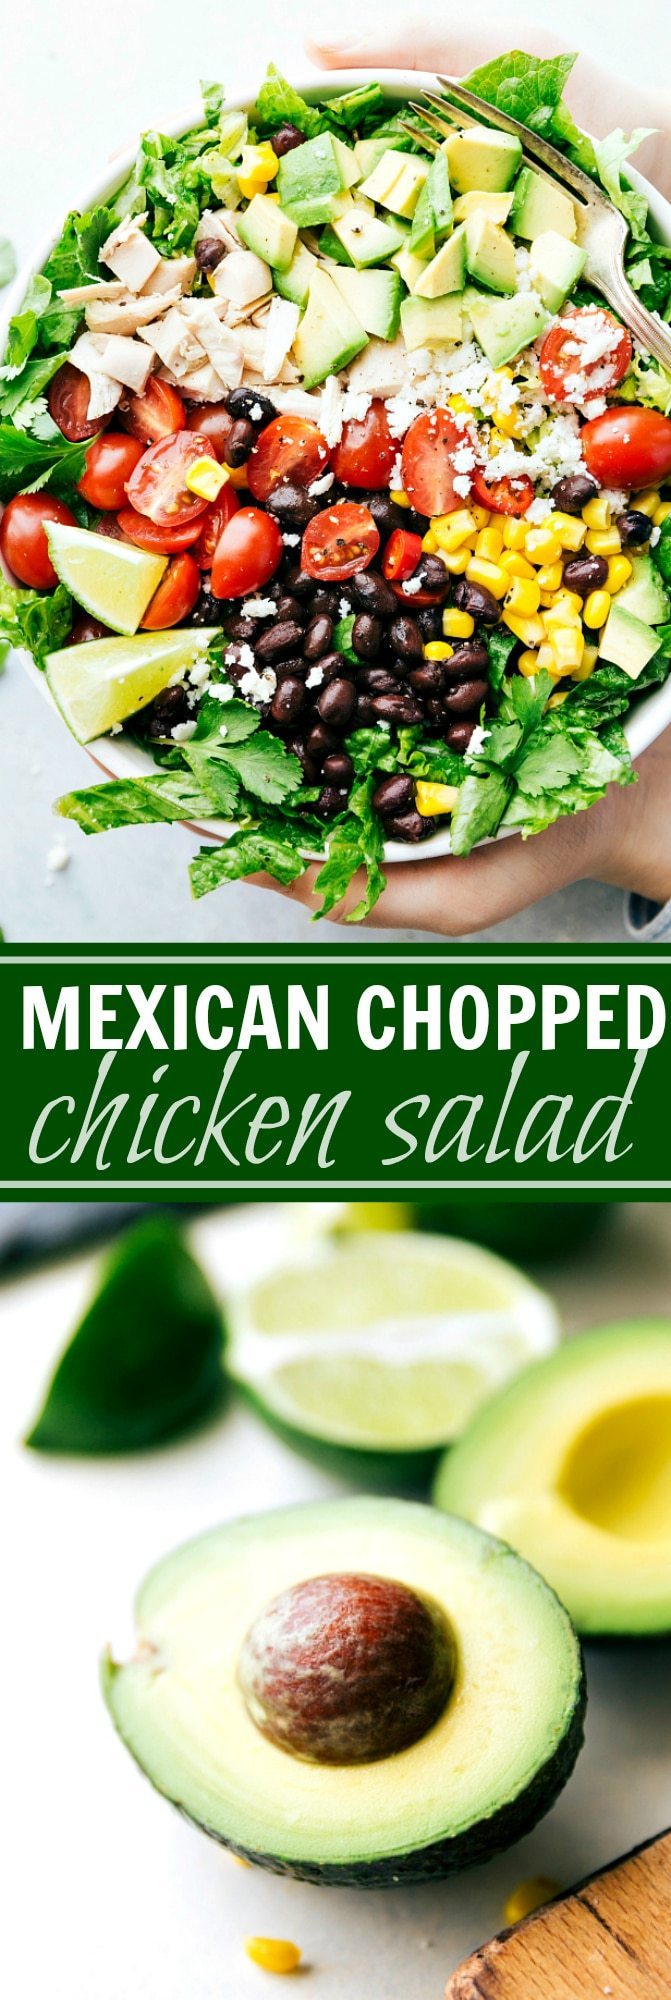 Mexican Chopped Chicken Salad | Chelsea's Messy Apron